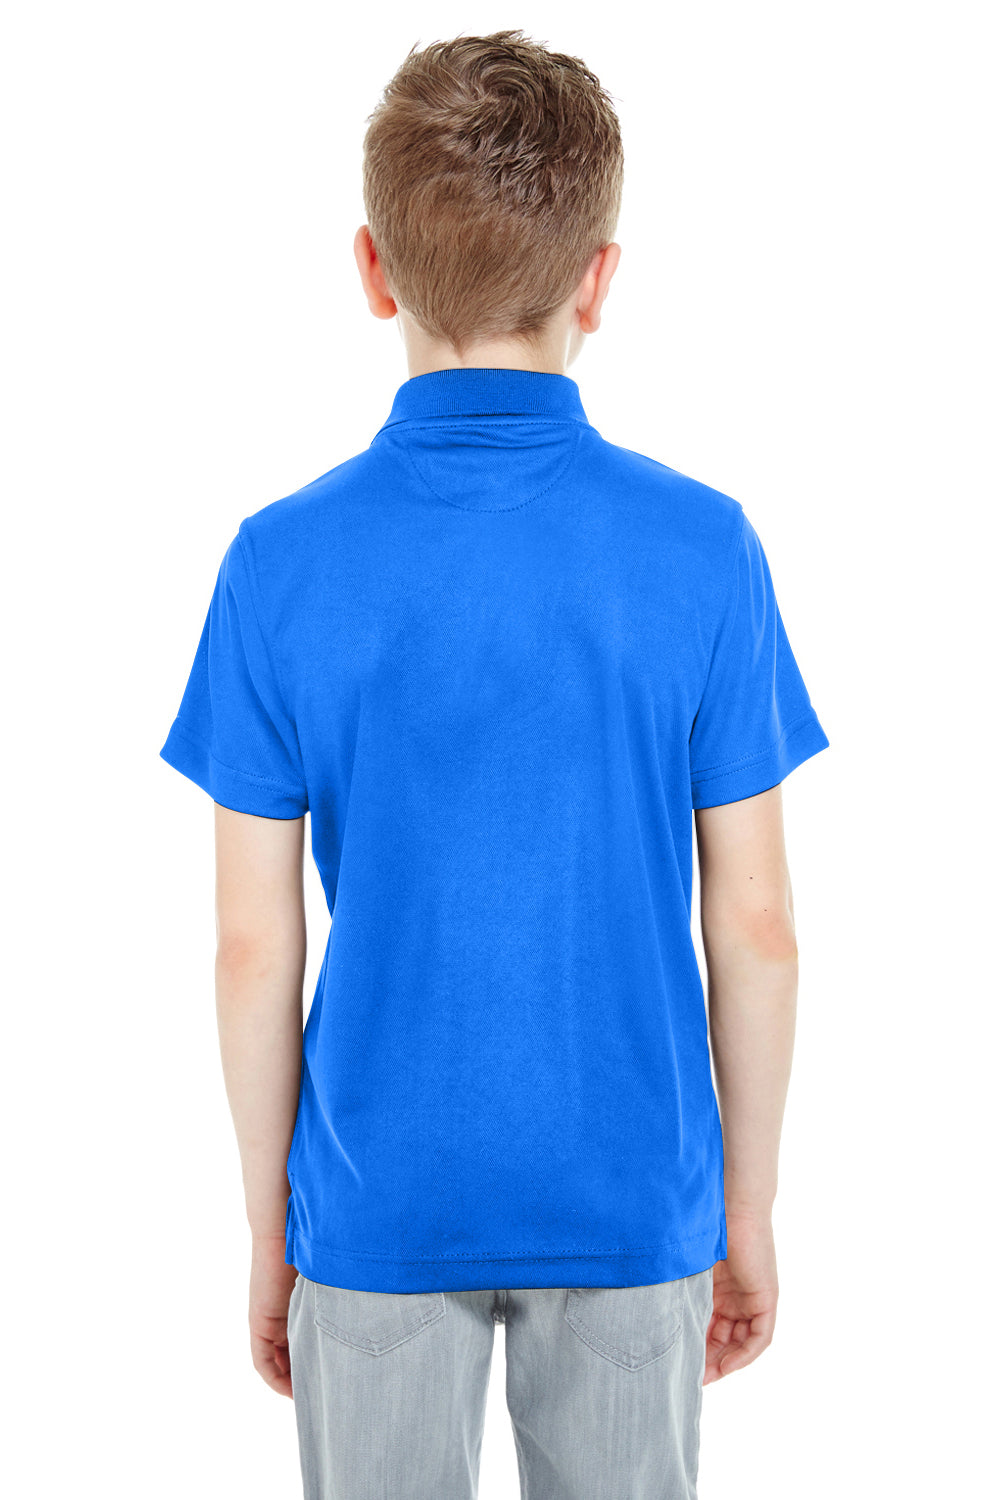 UltraClub 8210Y Youth Cool & Dry Moisture Wicking Short Sleeve Polo Shirt Royal Blue Back